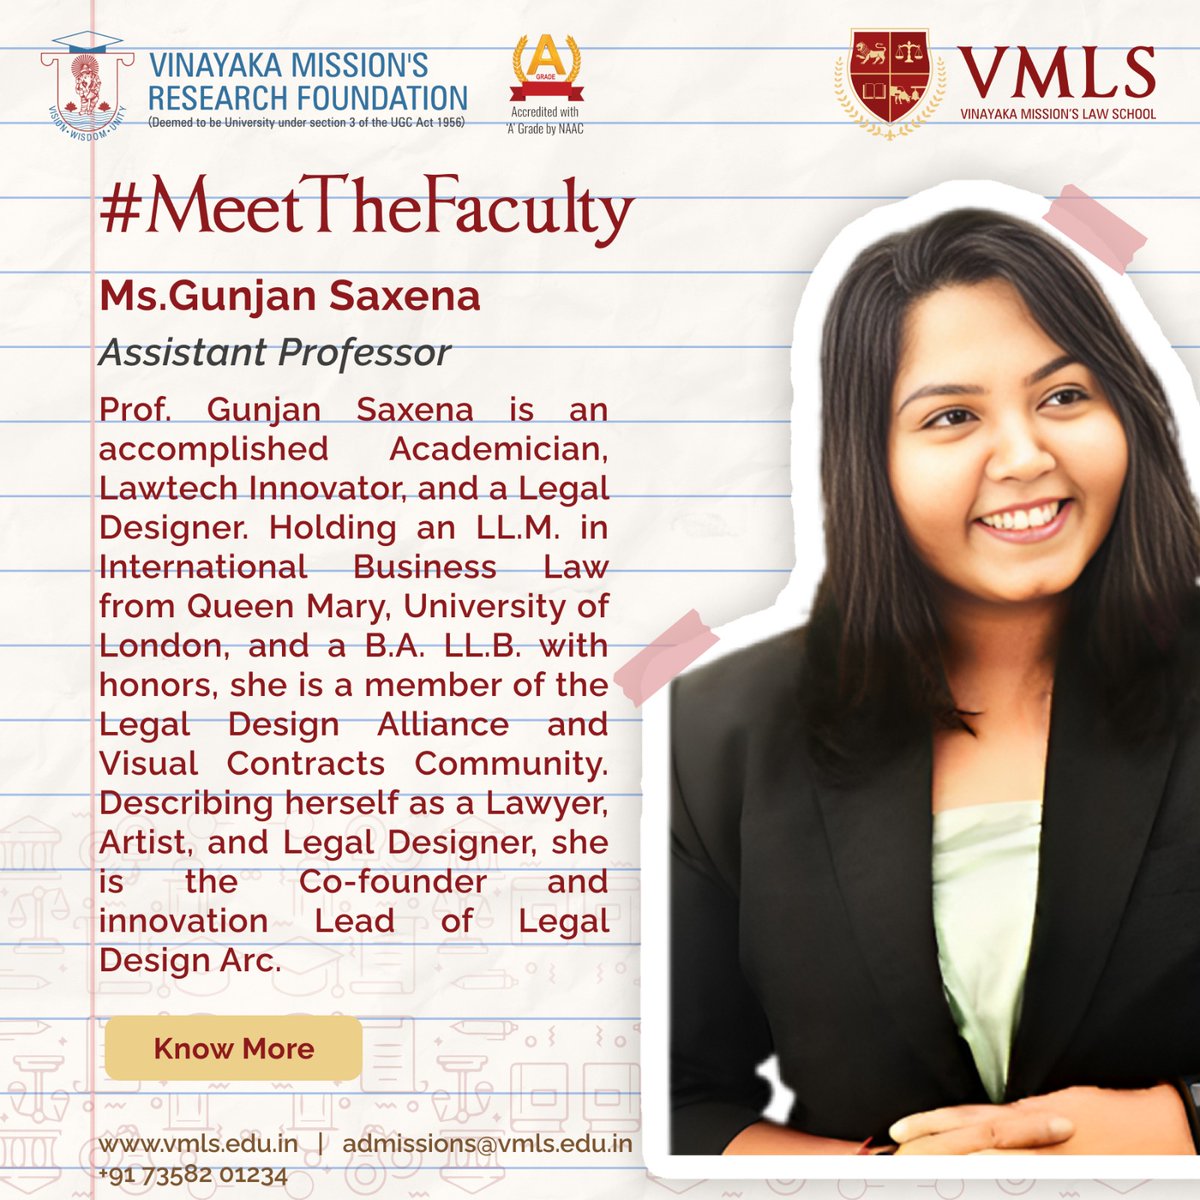 Prof. Gunjan Saxena is an accomplished Academician, Lawtech Innovator, and a Legal Designer. Holding an LL.M. in International Business Law from Queen Mary, University of London, and a B.A. LL.B. with honors
#MeetTheFaculty #FacultyIntroduction #FacultyExcellence #vmls